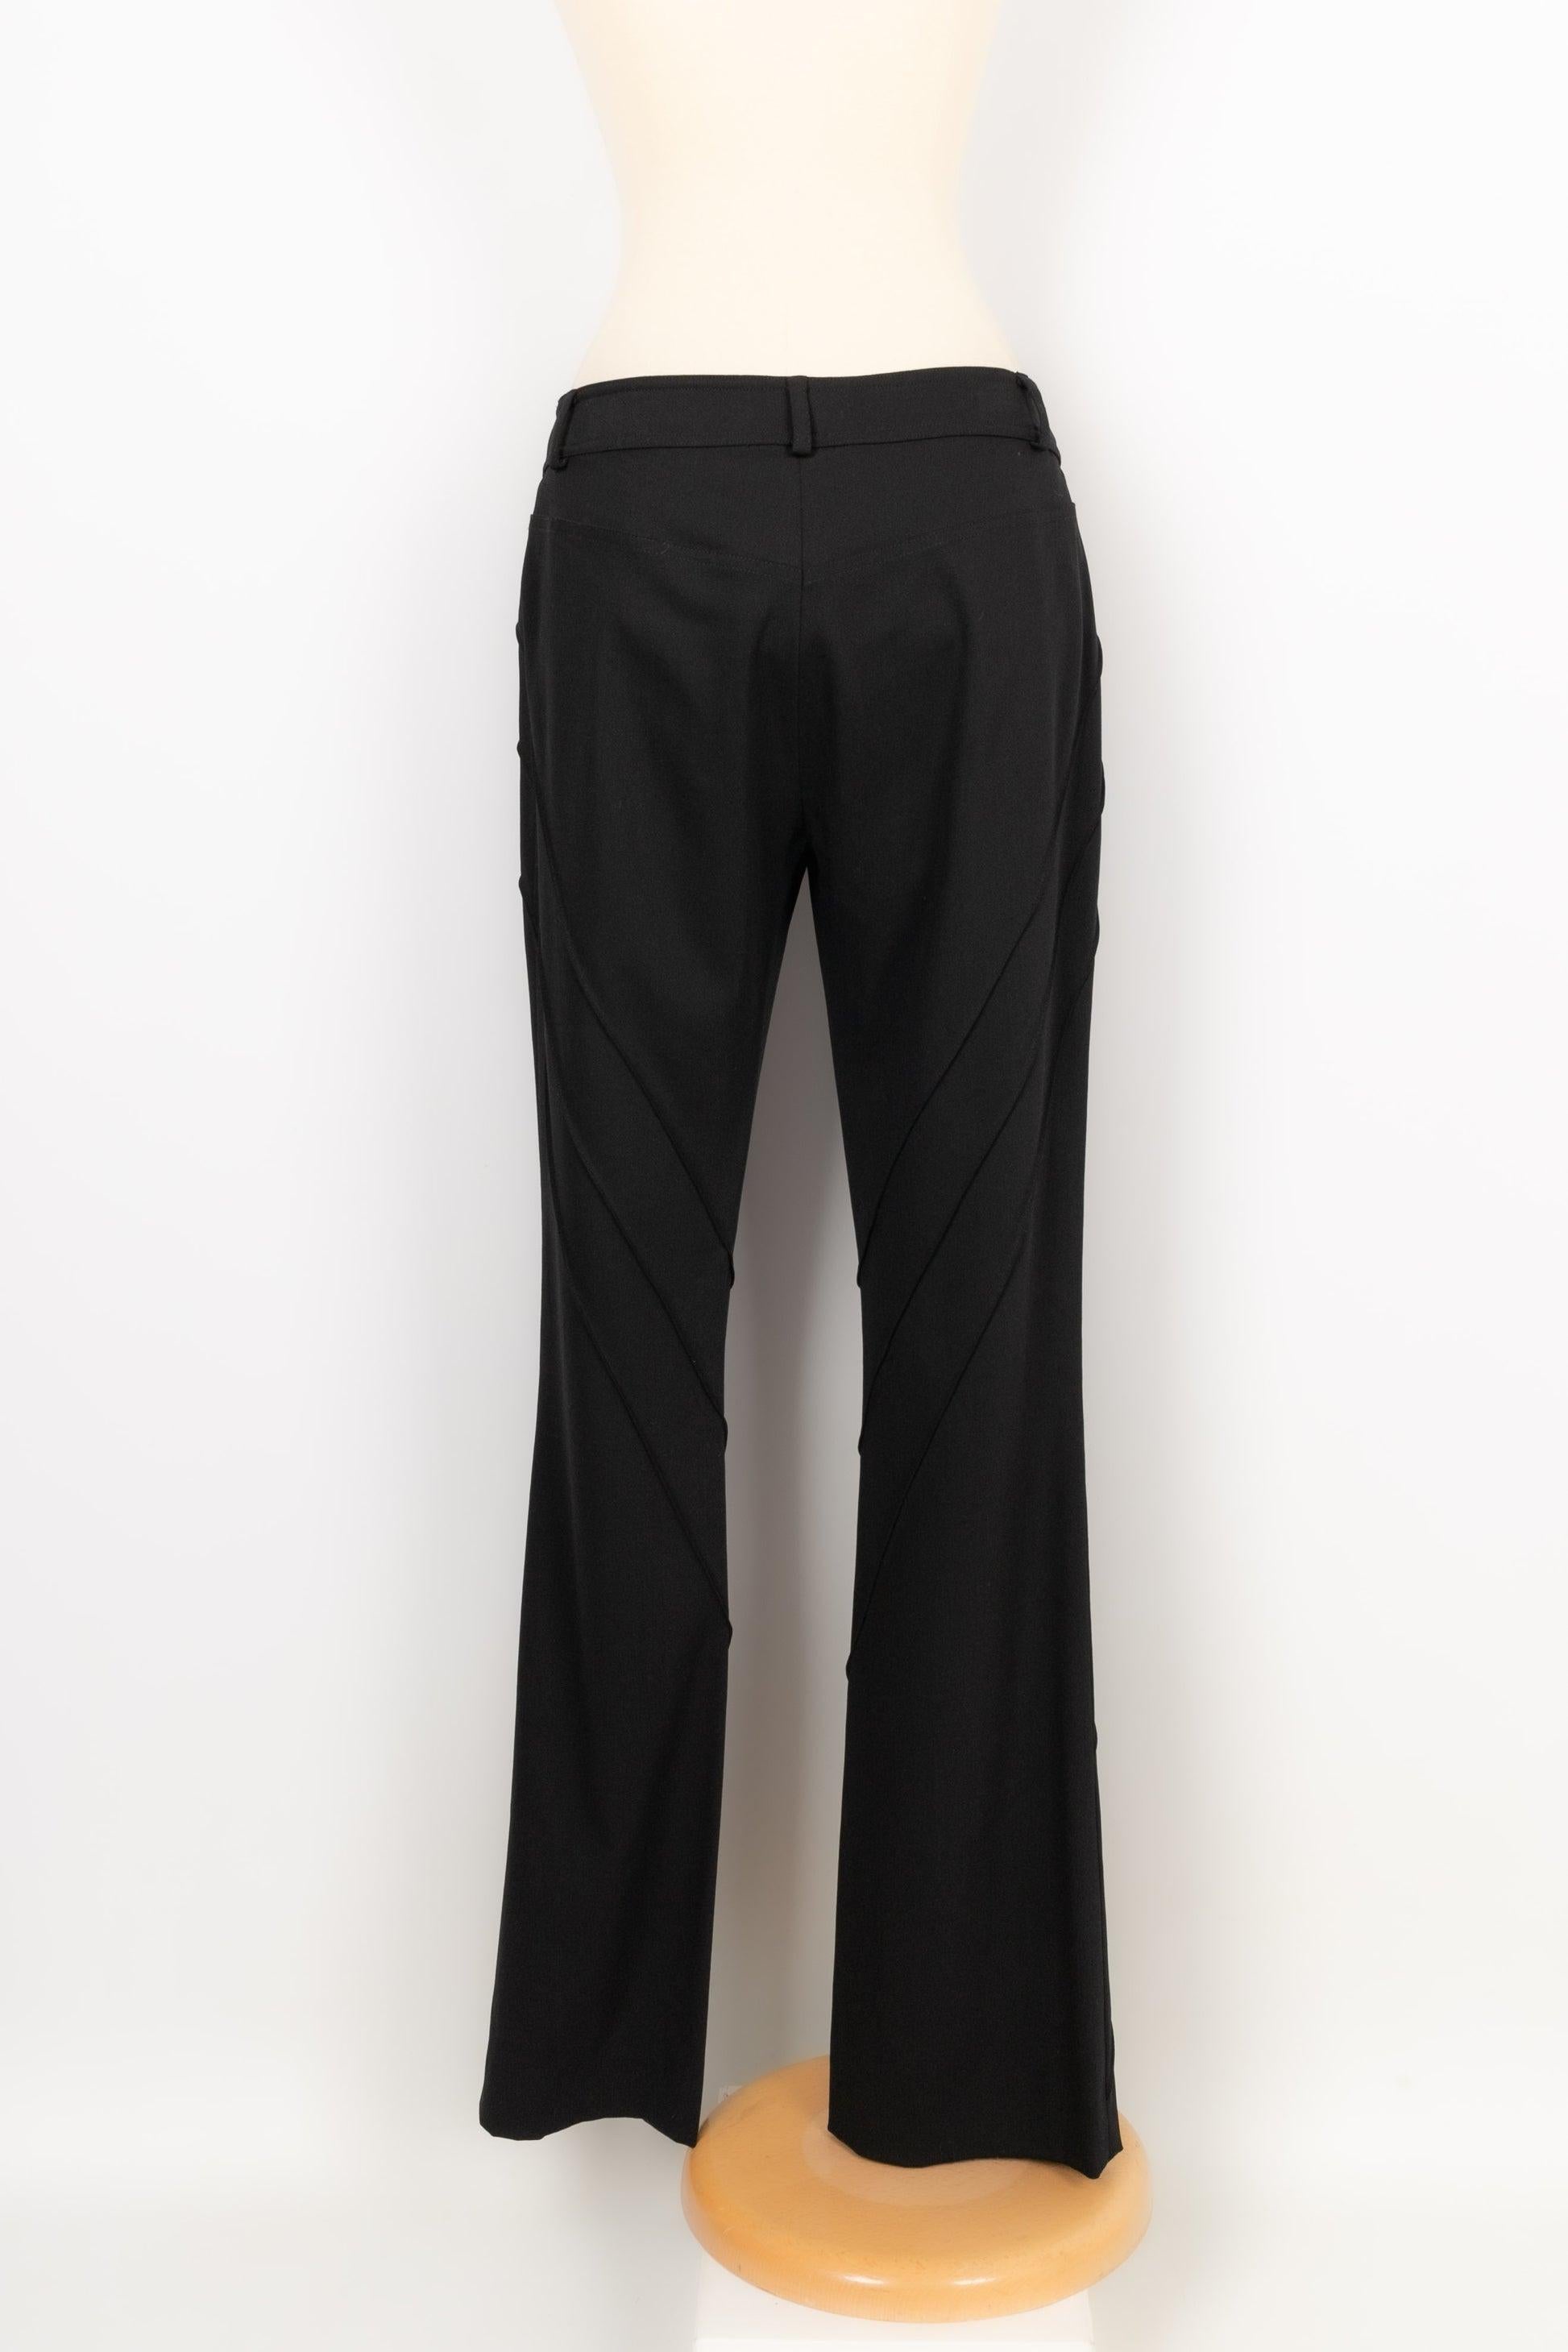 Christian Dior Black Blended Wool Pants, 2000's In Excellent Condition For Sale In SAINT-OUEN-SUR-SEINE, FR